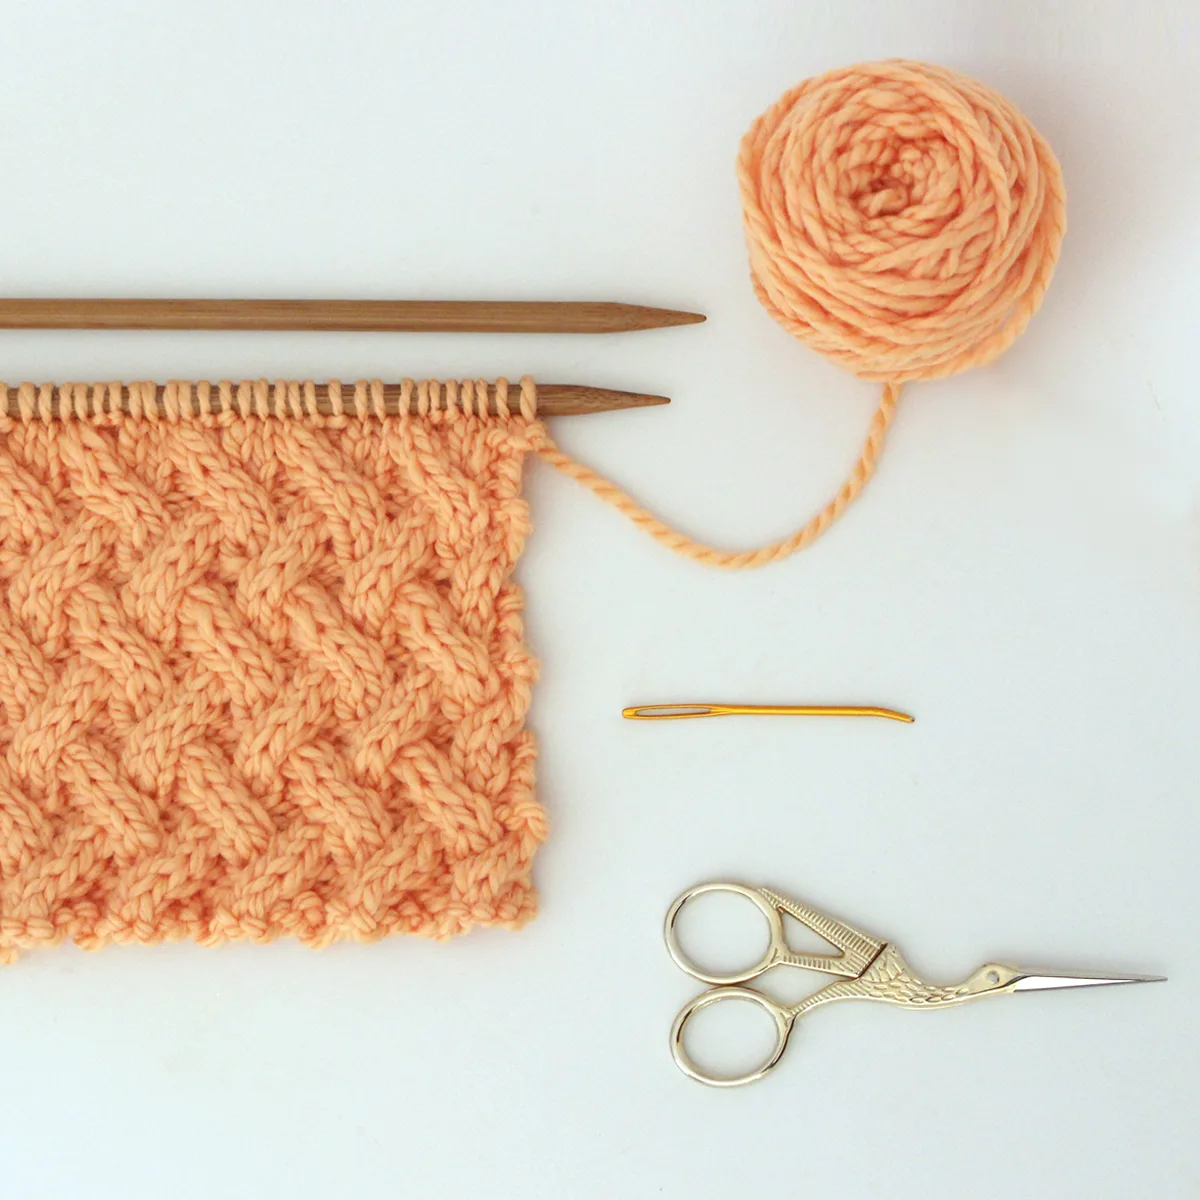 Knitting supplies for Lattice Cable Stitch with yarn, needles, scissors, and tapestry needle.